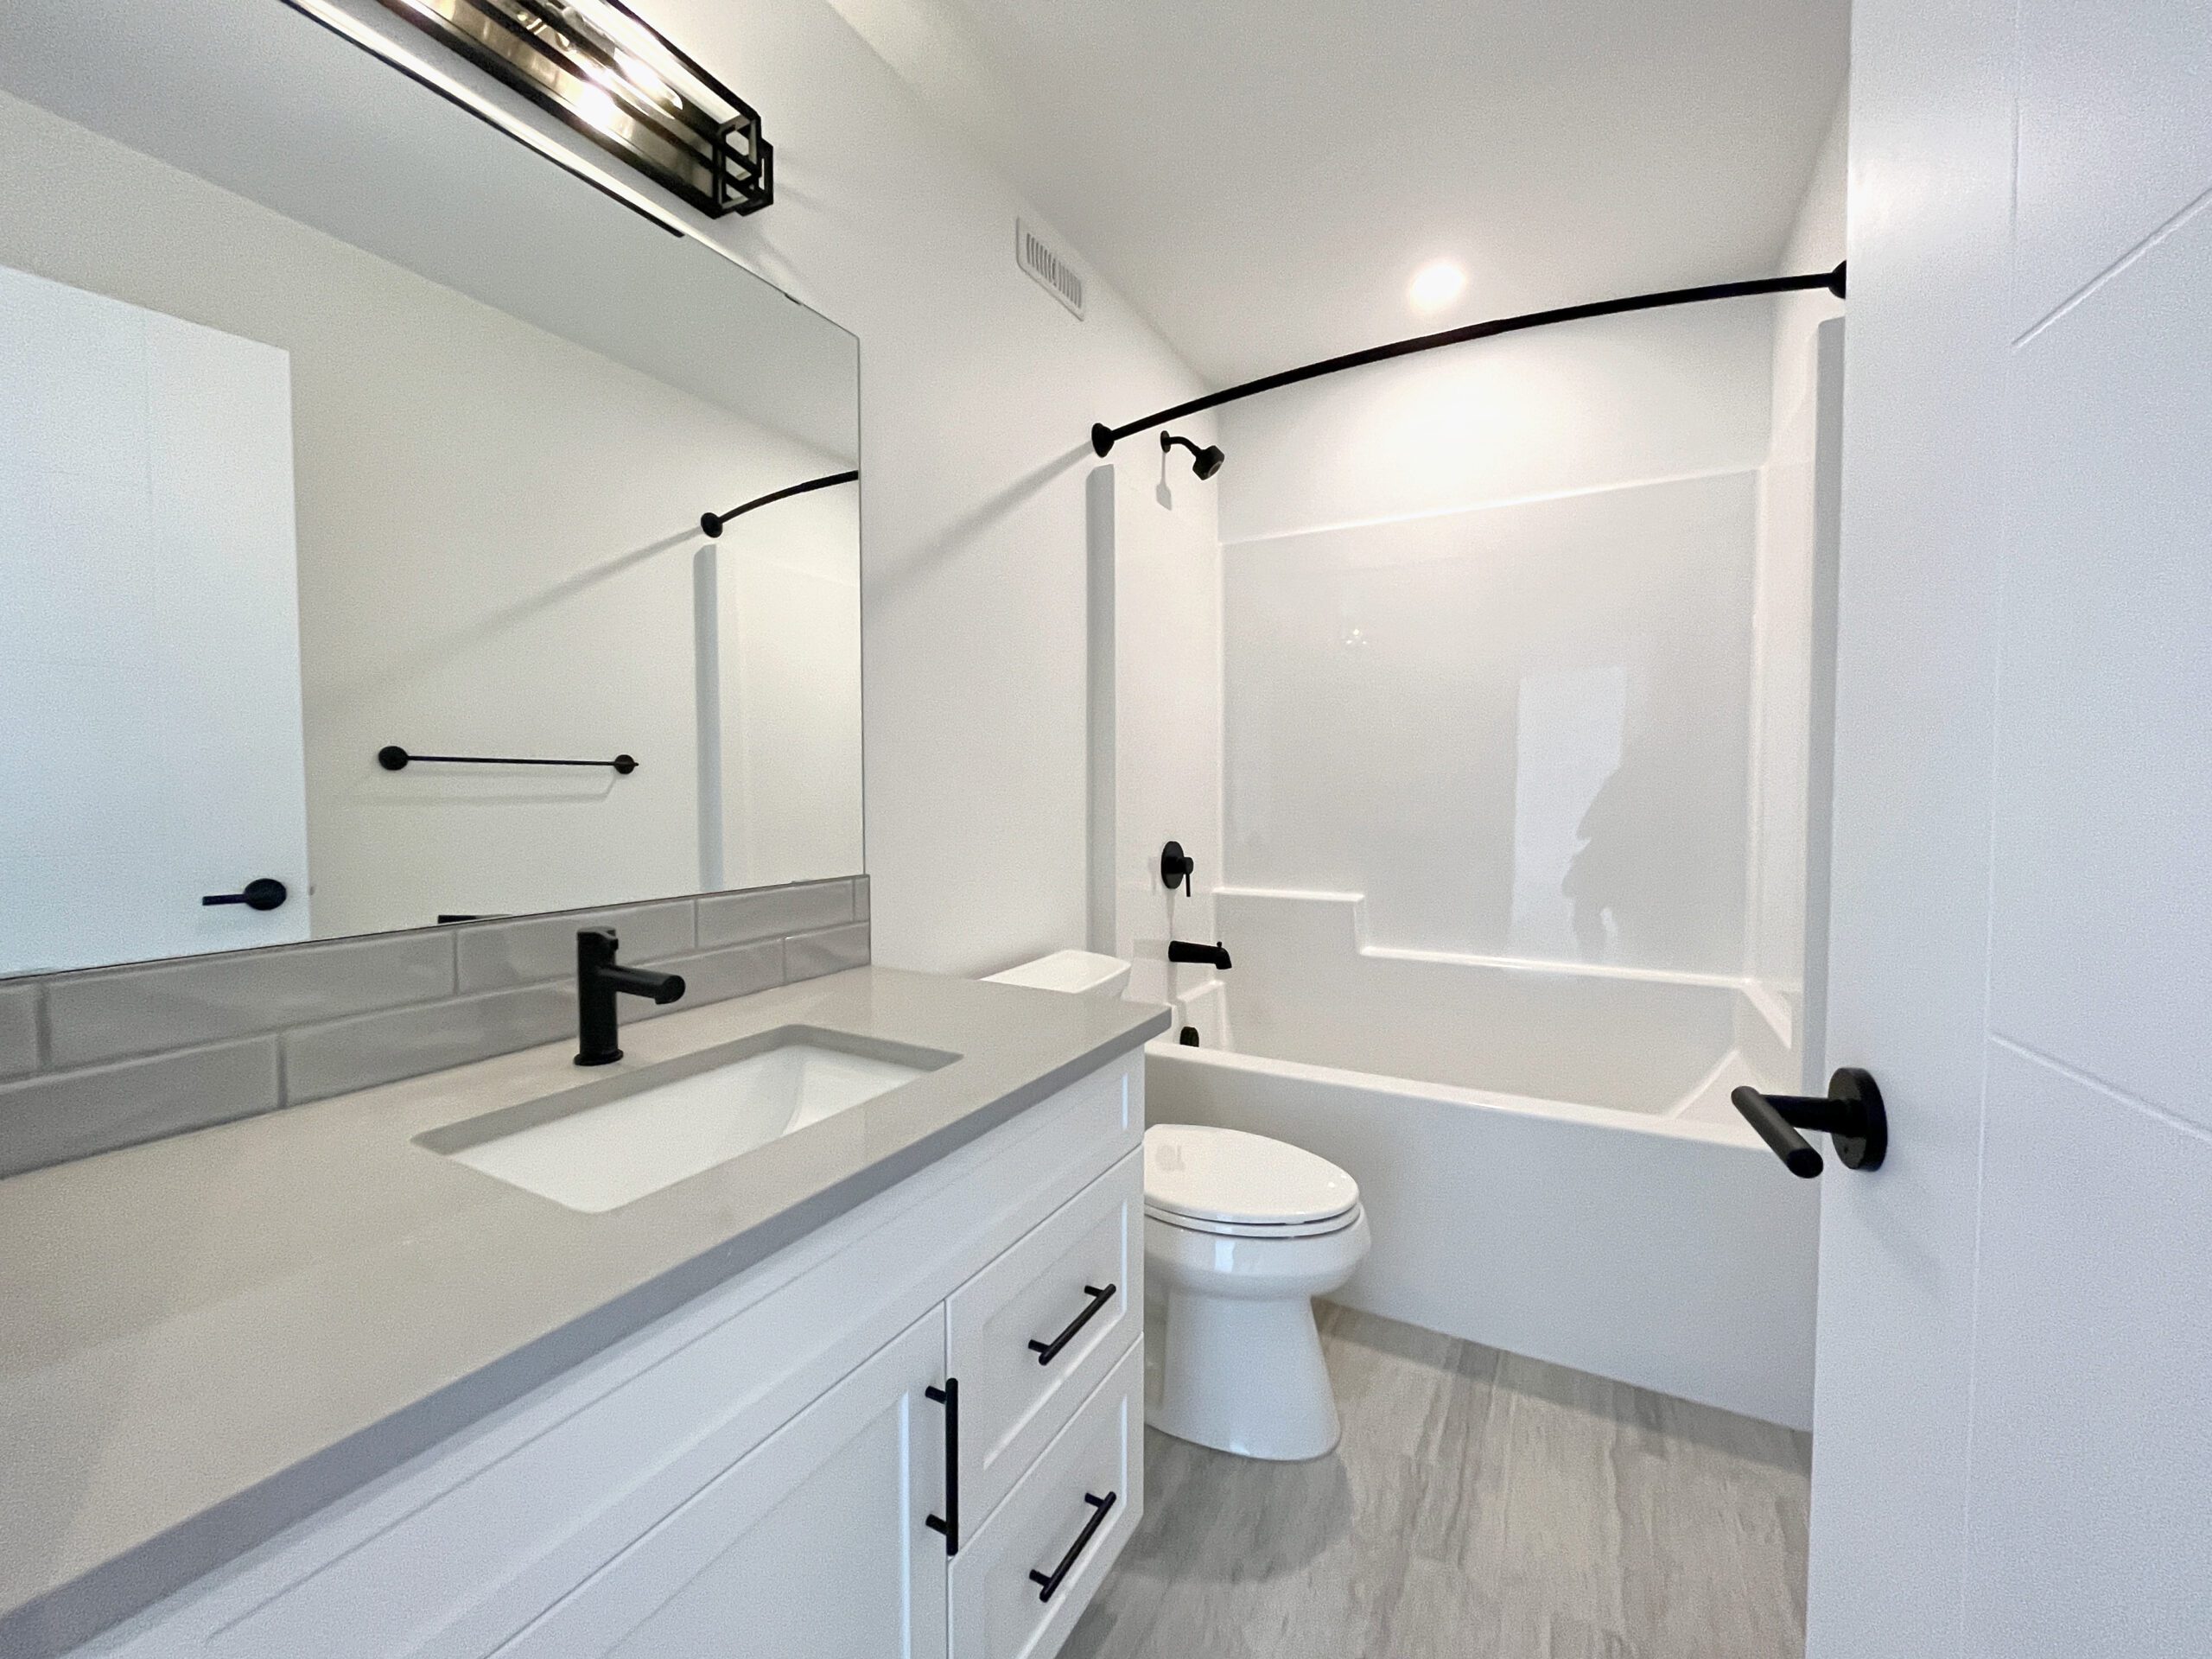 A white and gray bathroom with a toilet and sink.